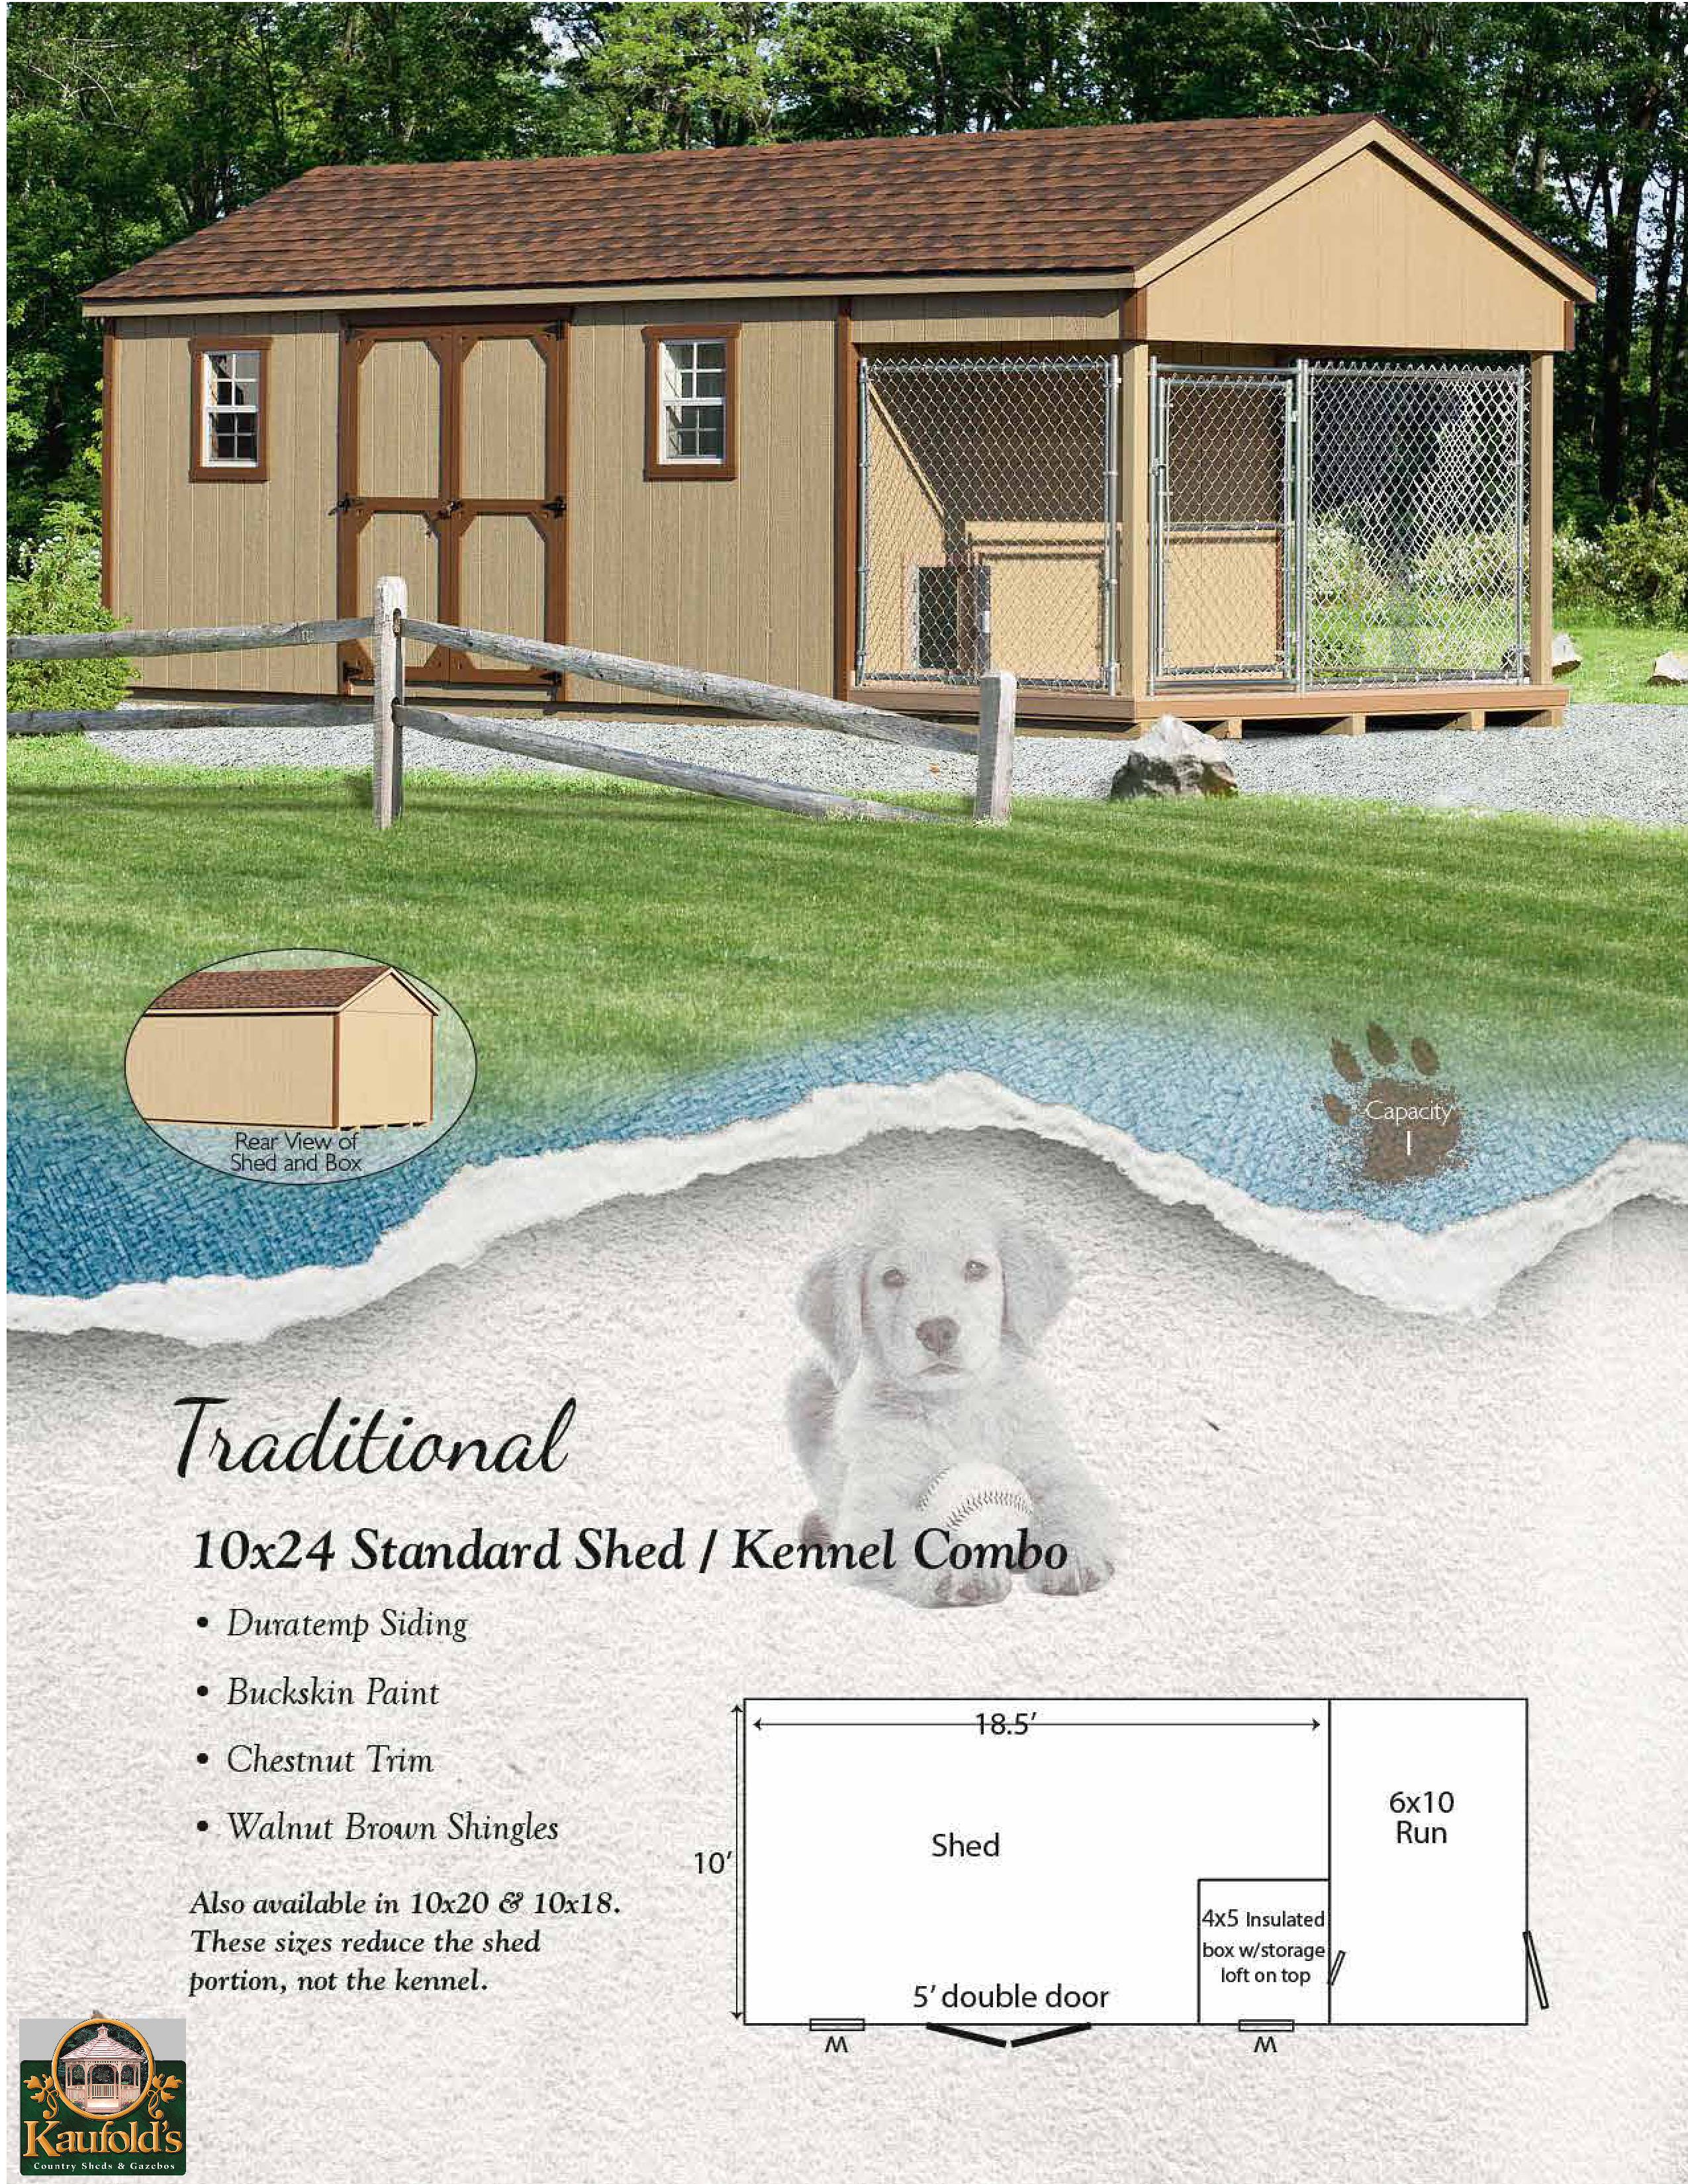 10 x 24 Shed/Kennel Combo